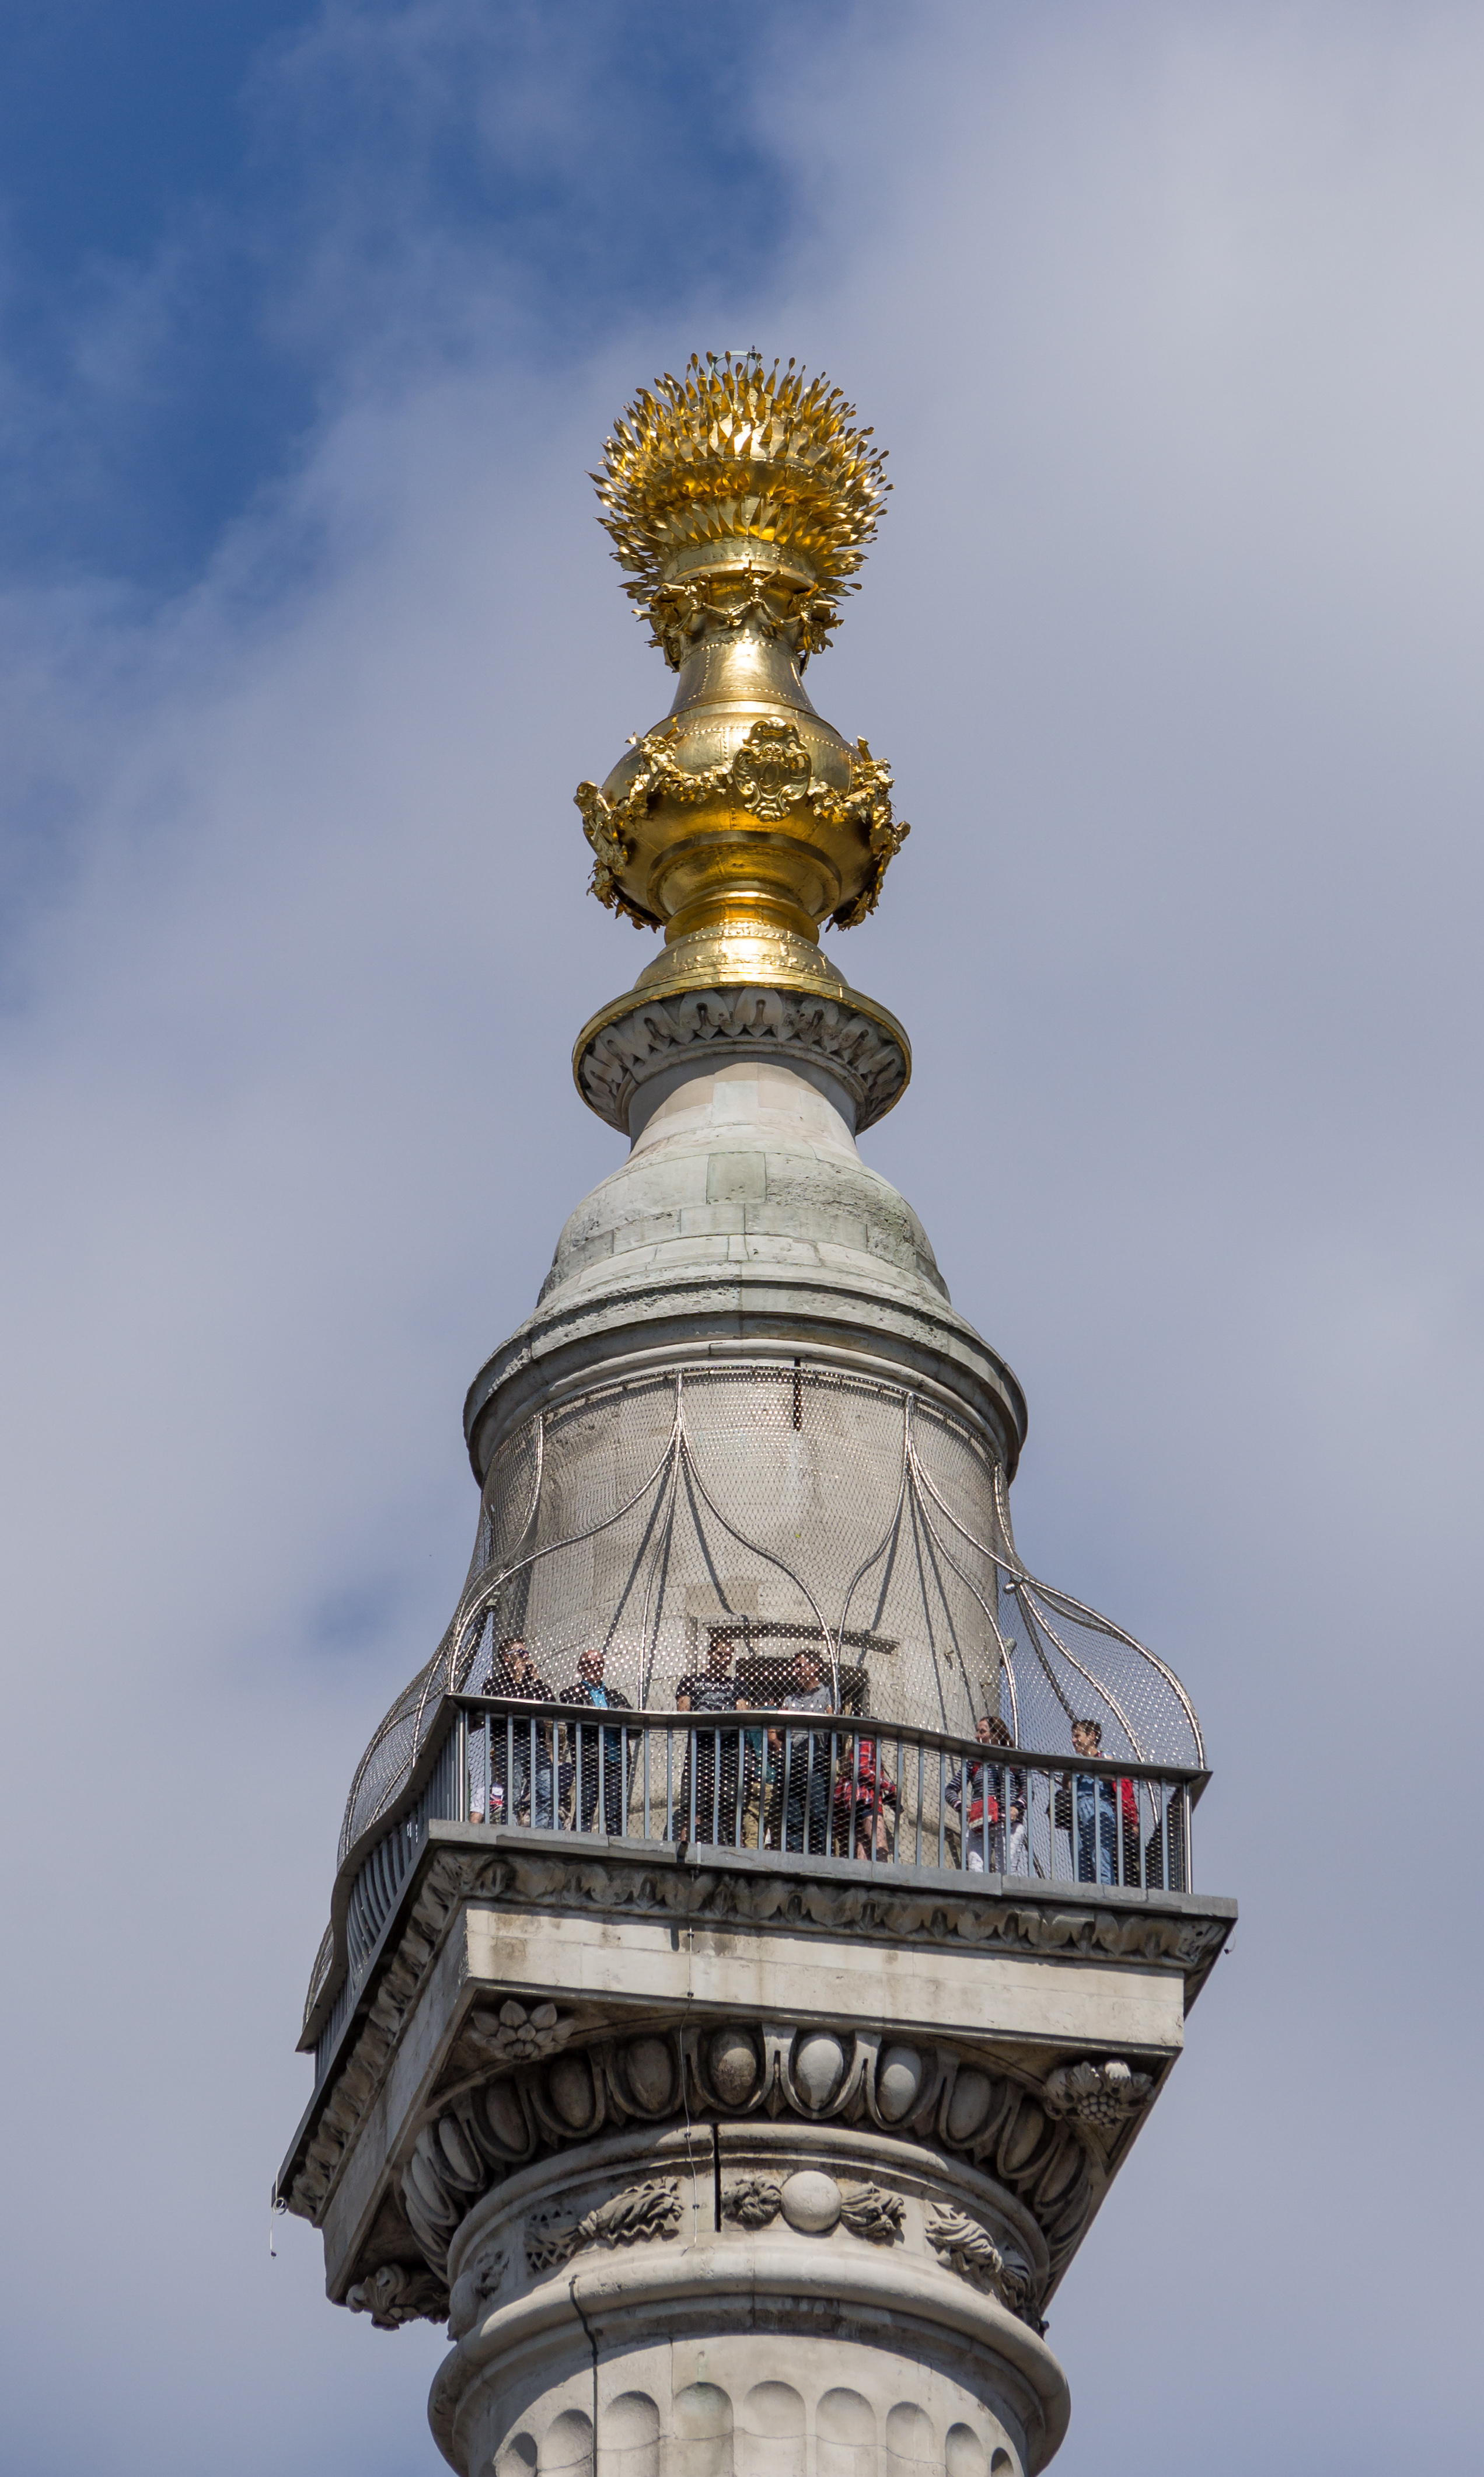 Top of Monument to the Great Fire of London